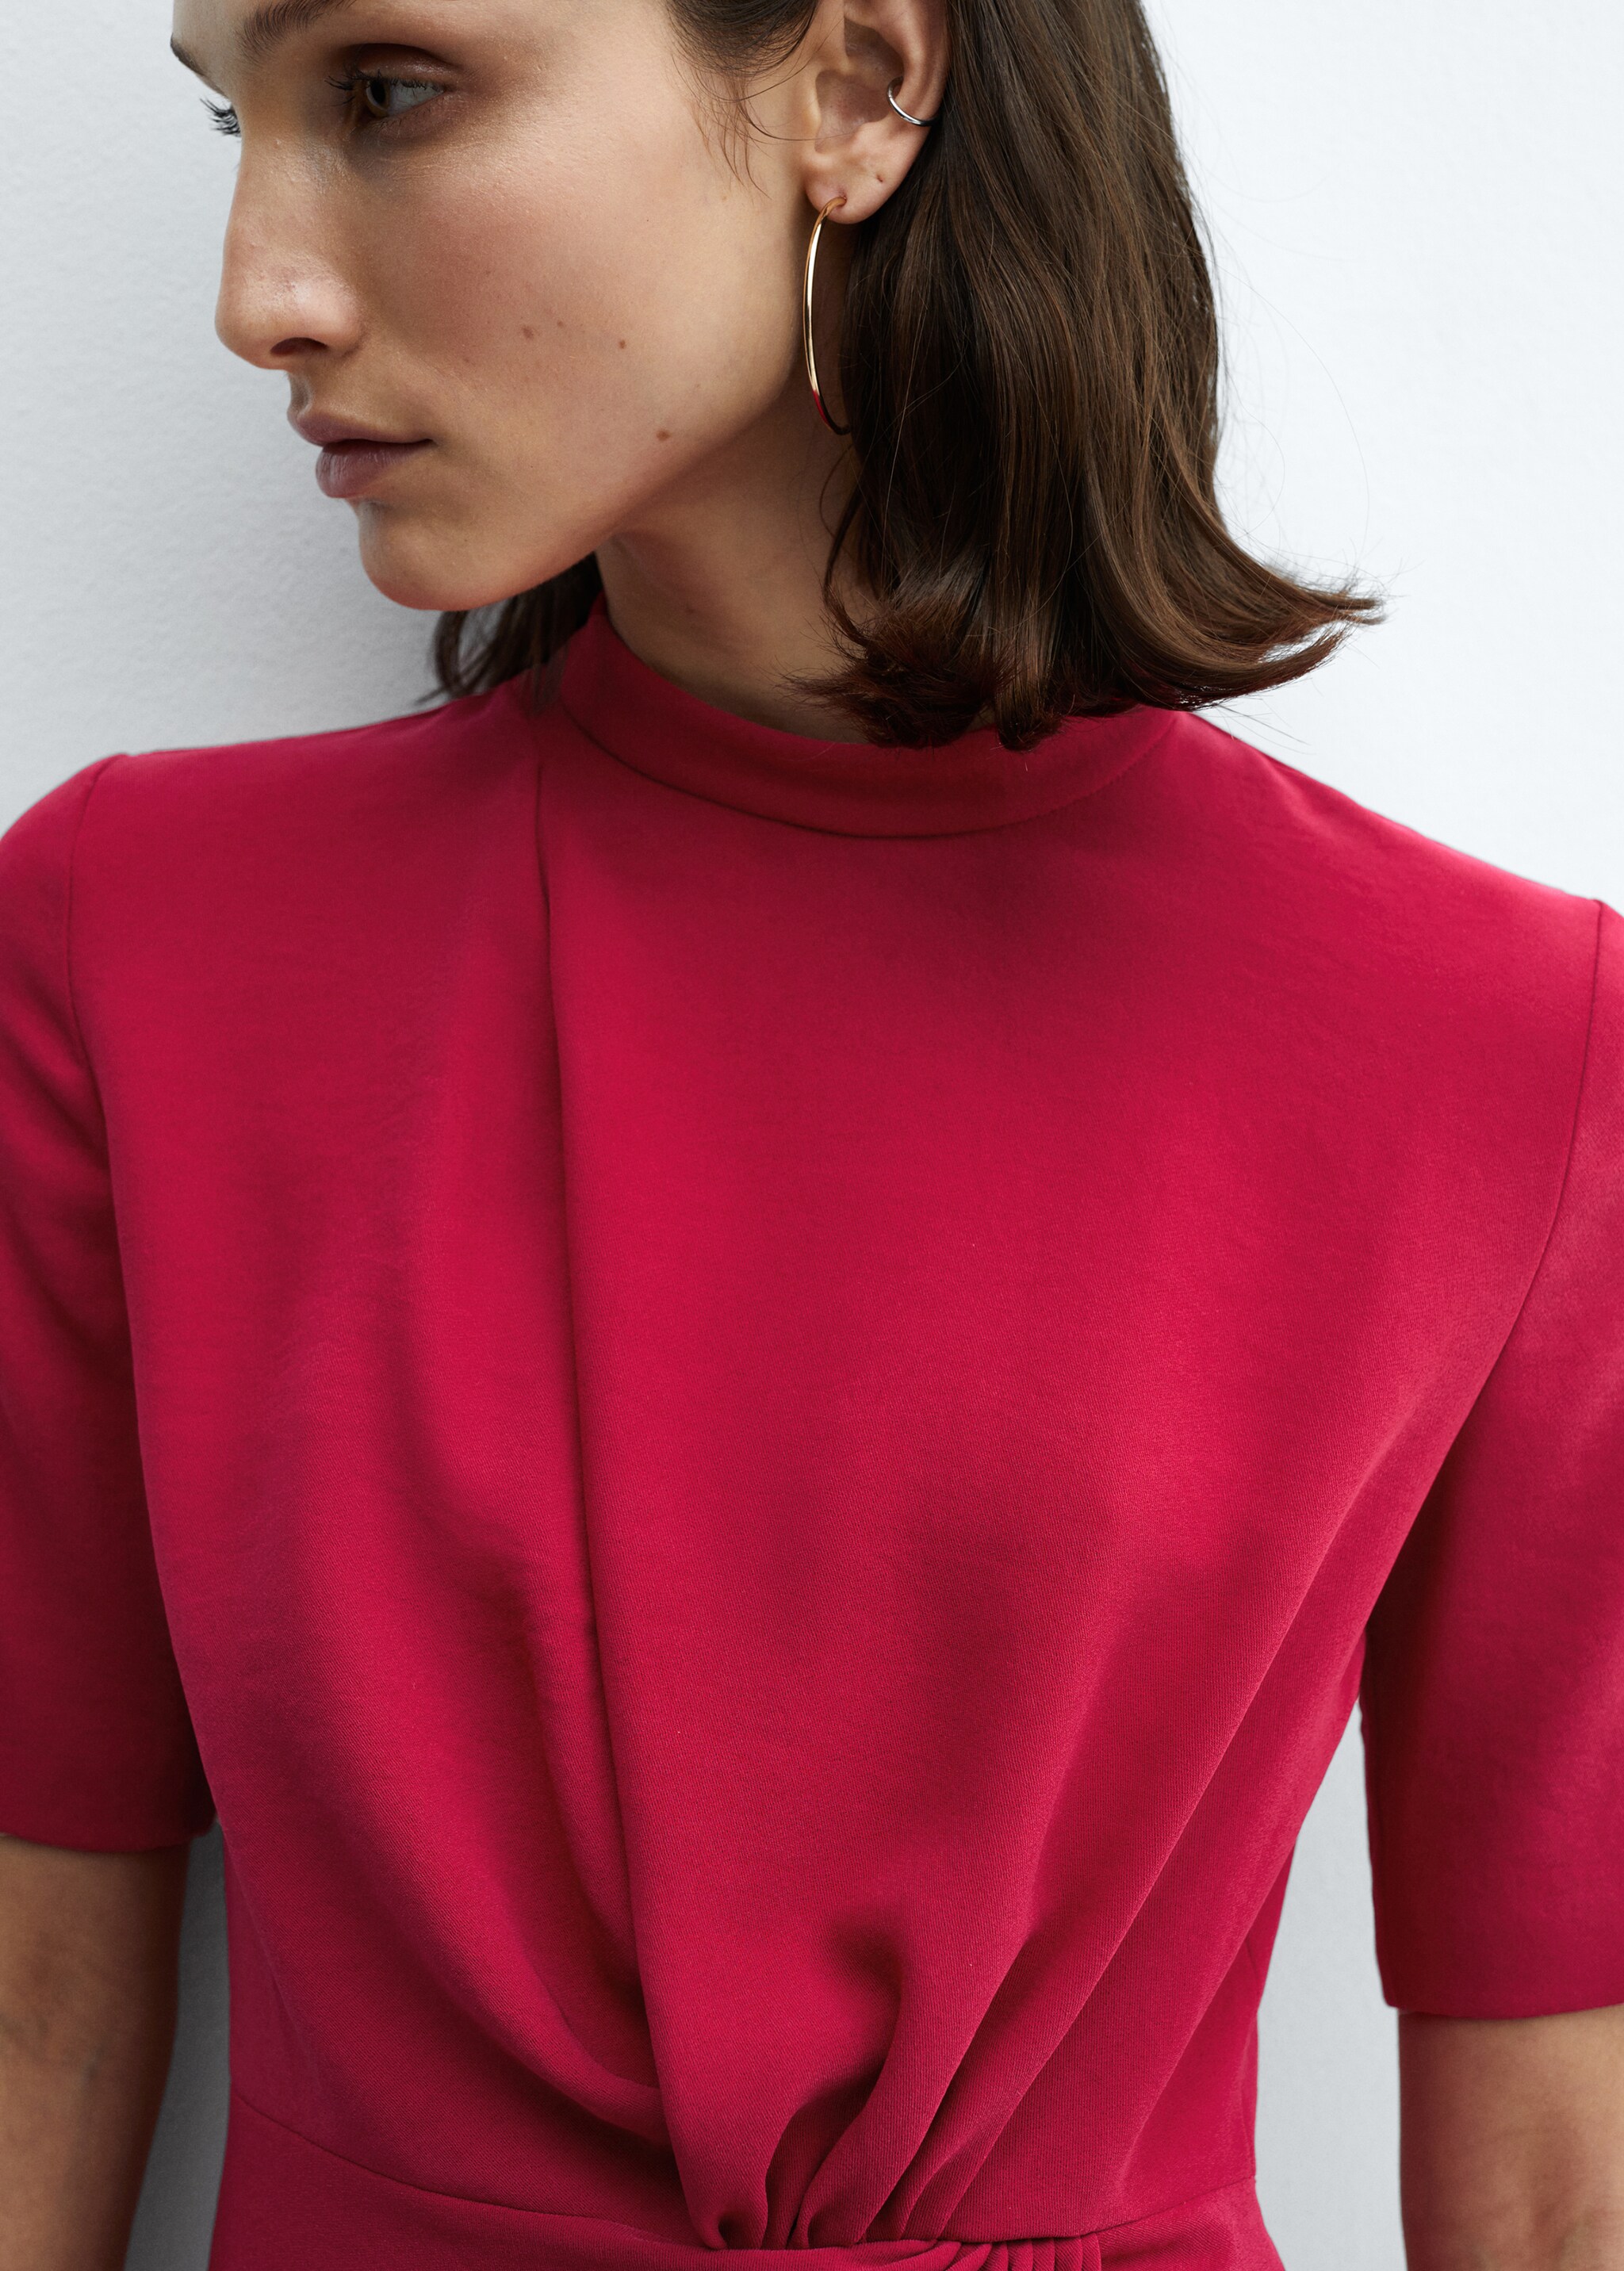 Draped detail dress - Details of the article 1